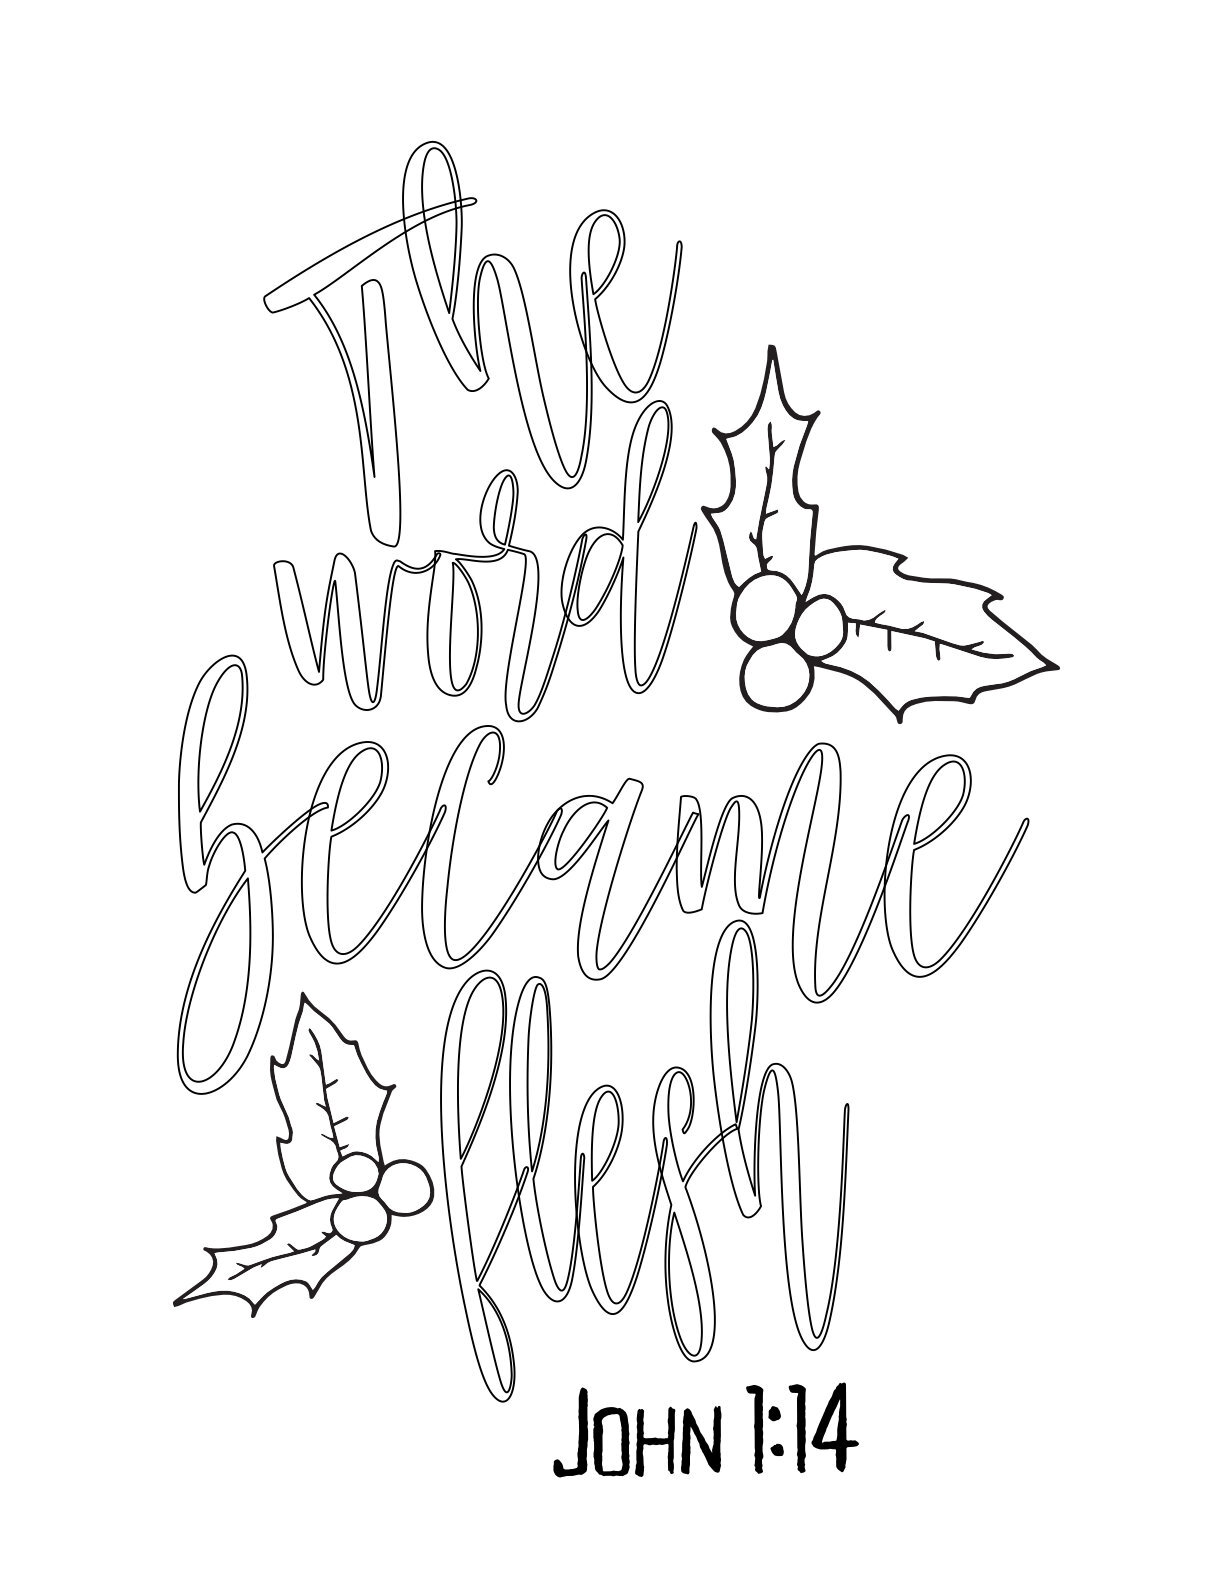 Free Advent Coloring Page - The Word Became Flesh - John 1:14 Christmas Printable CLICK HERE TO DOWNLOAD YOUR FREE PRINTABLE CHRISTMAS COLORING PAGE JOHN 1